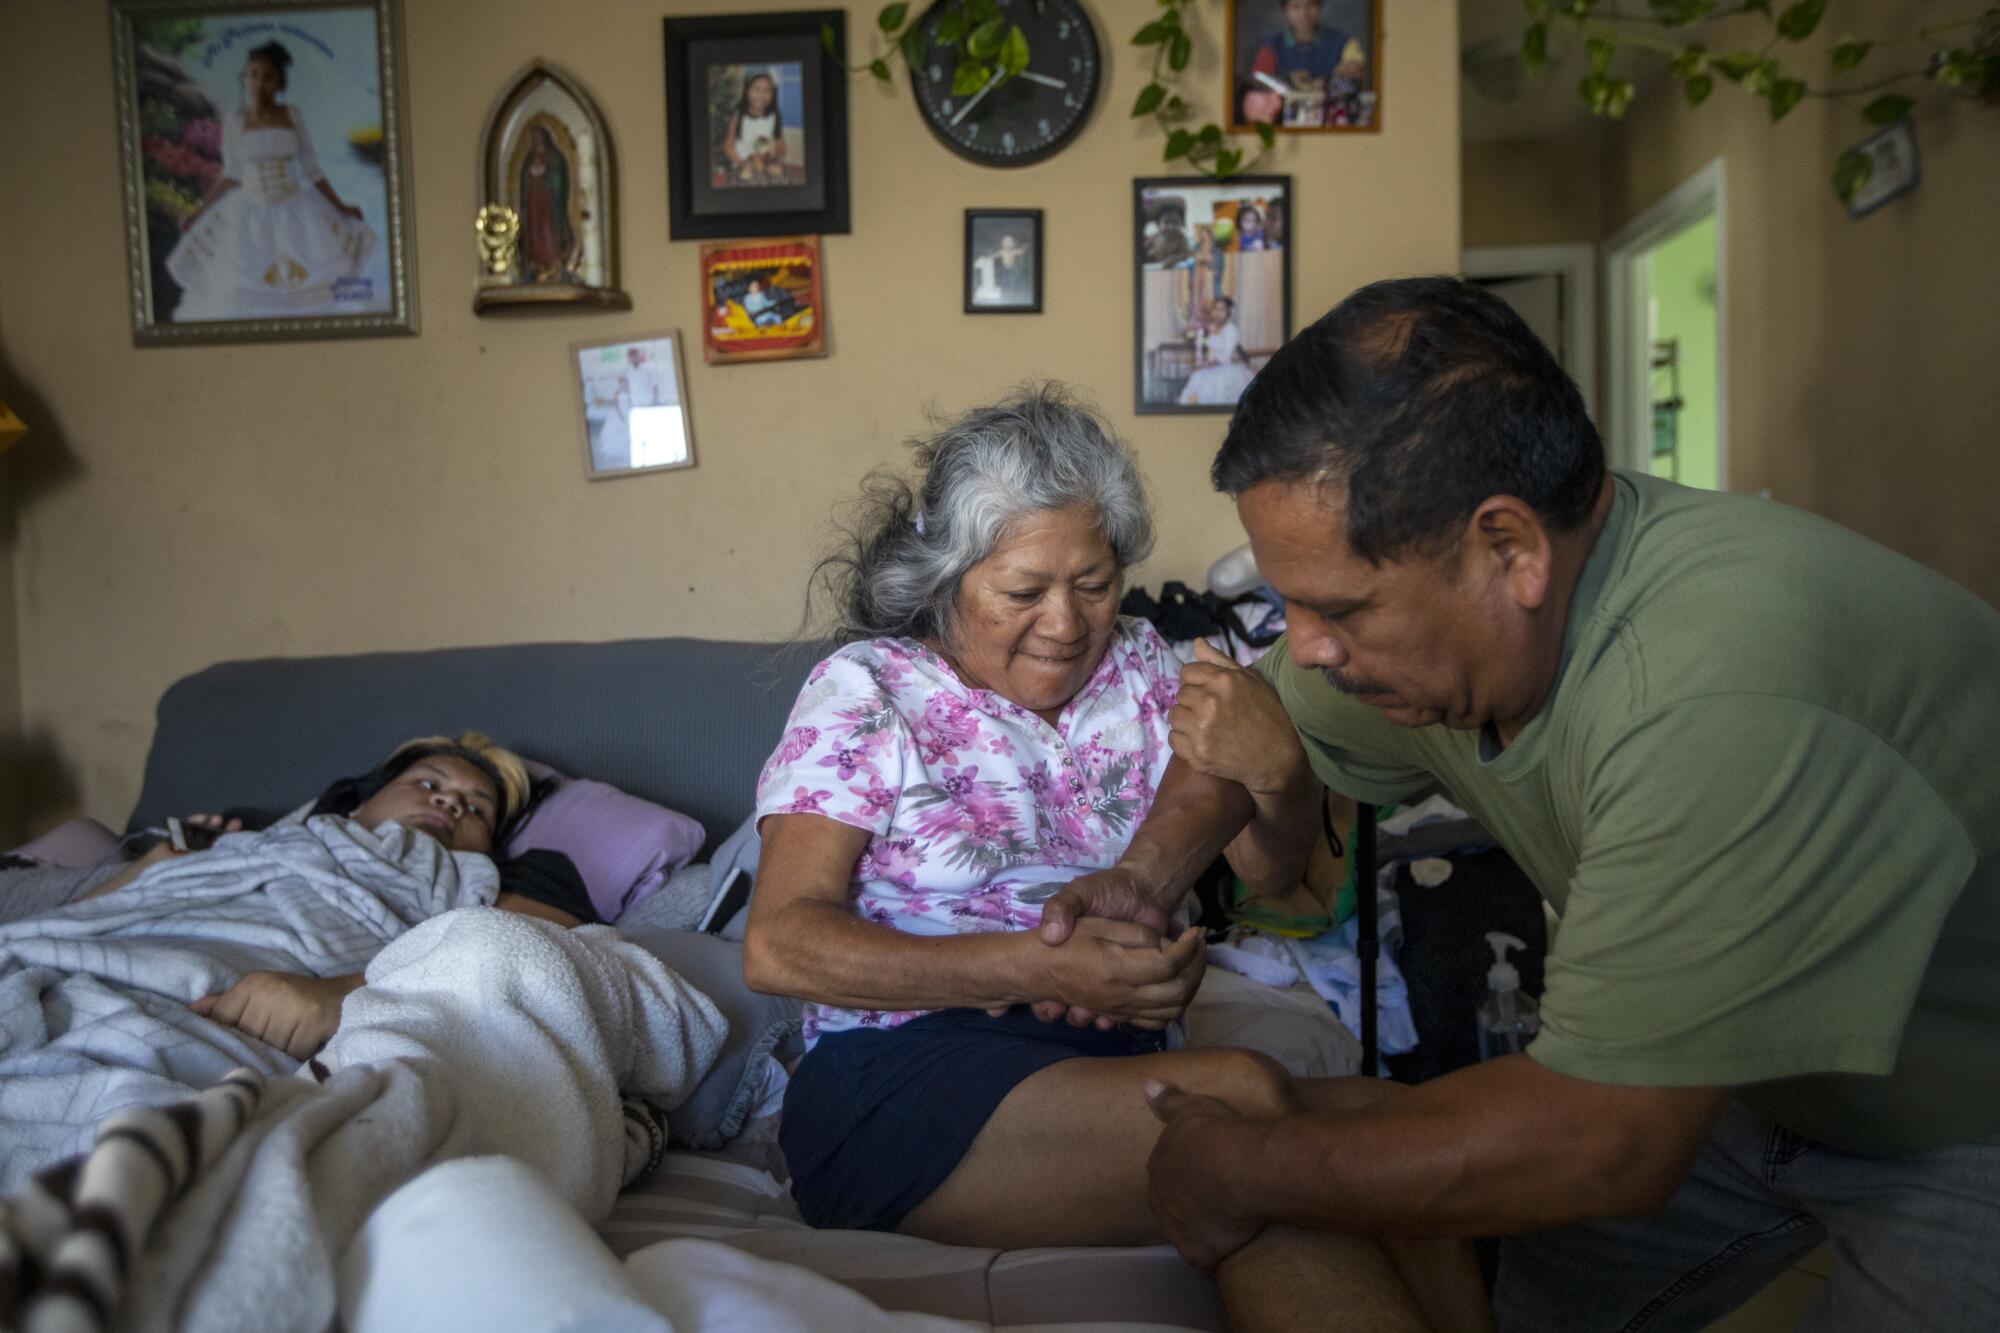 Jose Morales help his wife Reyna out of bed in South Los Angeles.